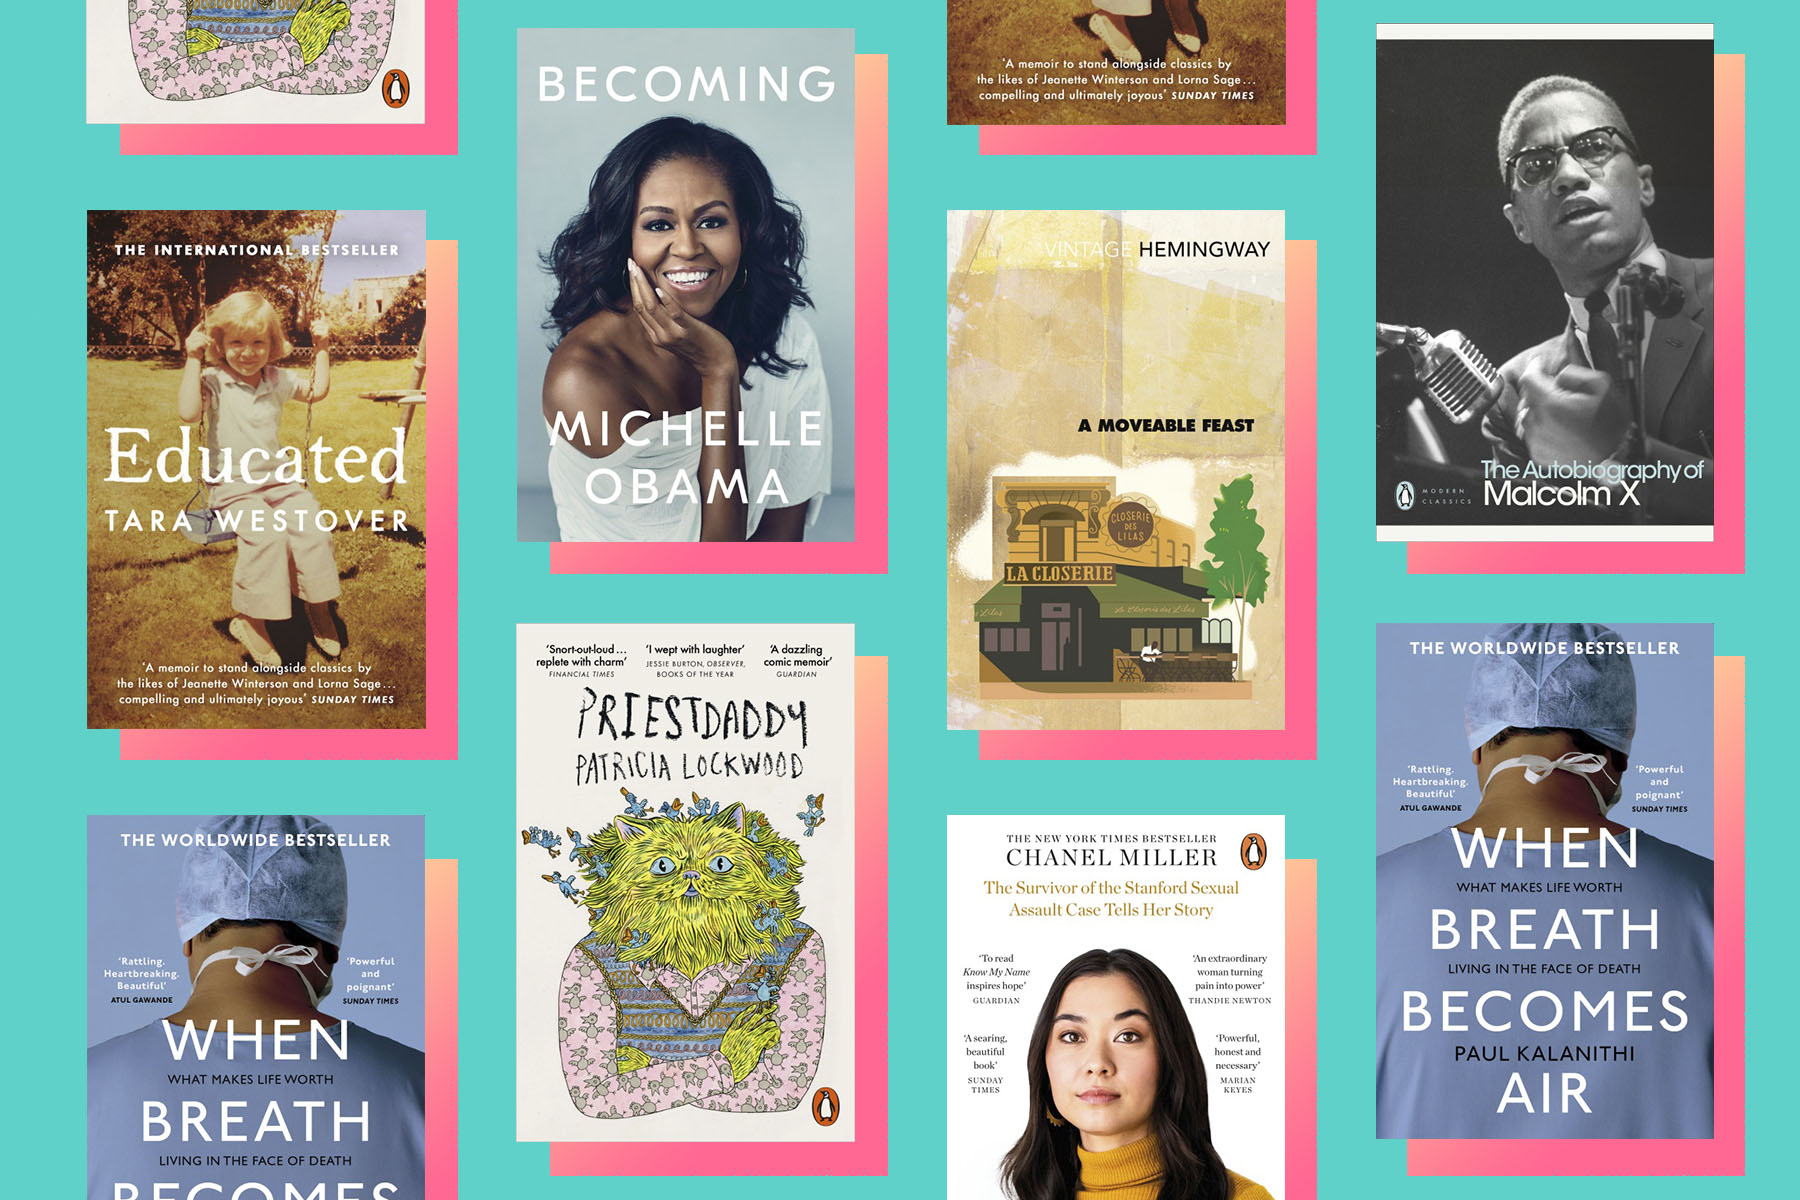 The best memoirs of all time including Michelle Obama's Becoming, Paul Kalanithi's When Breath Becomes Air, Chanel Miller's Know My Name and Patricia Lockwood's Priestdaddy.